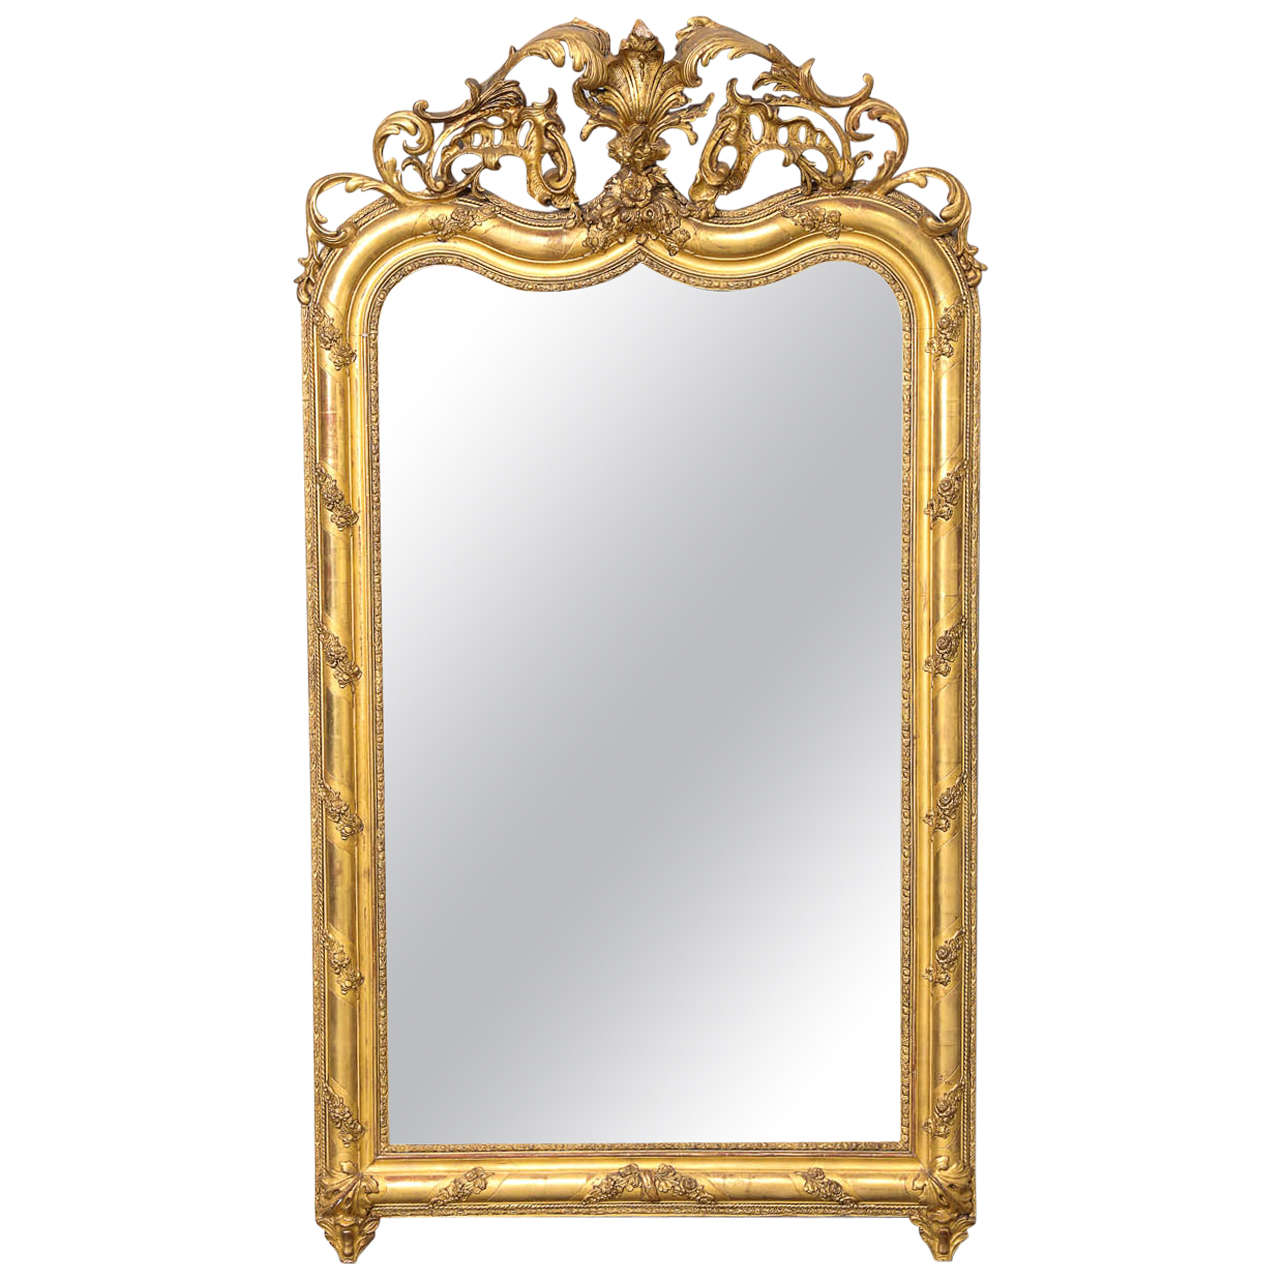 19th Century French Gold Gilt Mirror, Louis XIV Style For Sale